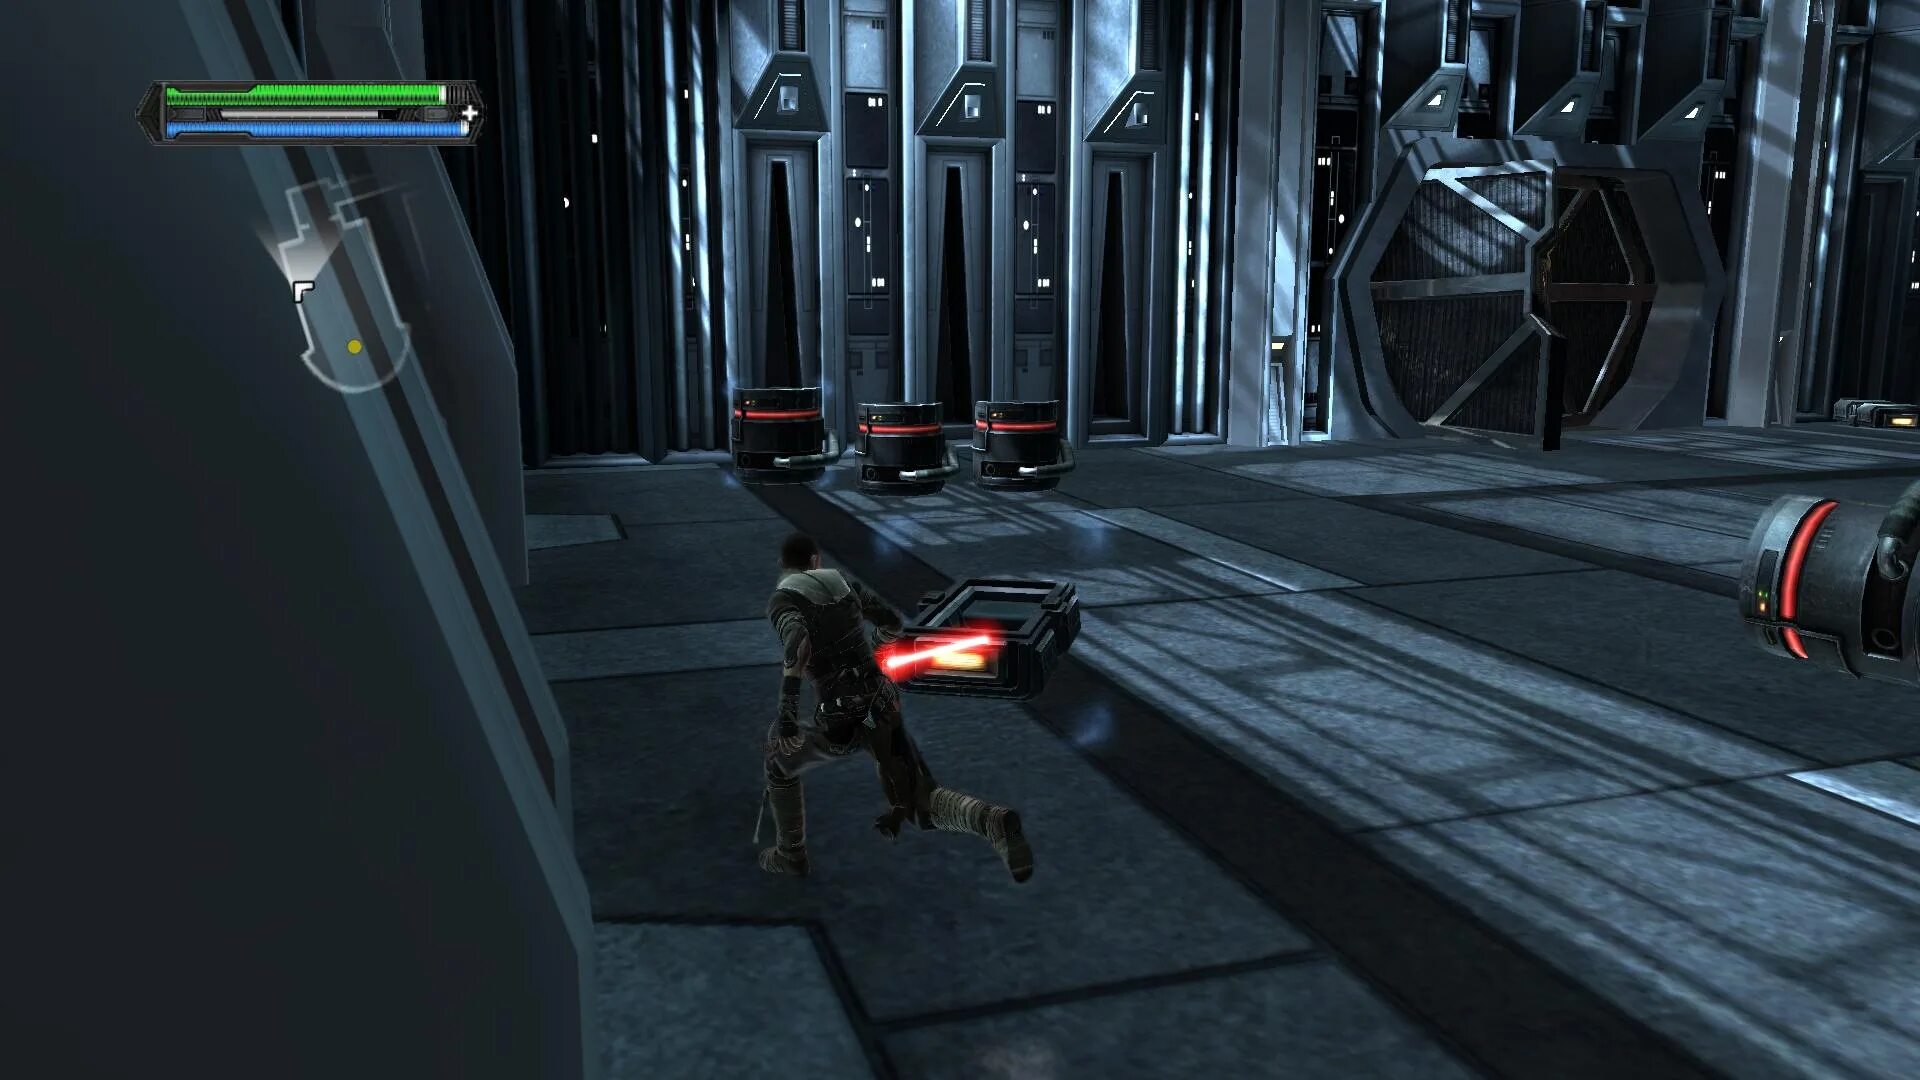 Star wars the force unleashed коды. 10) Star Wars: the Force unleashed. Star Wars: the Force unleashed - Ultimate Sith Edition. Star Wars the Force unleashed Boss.